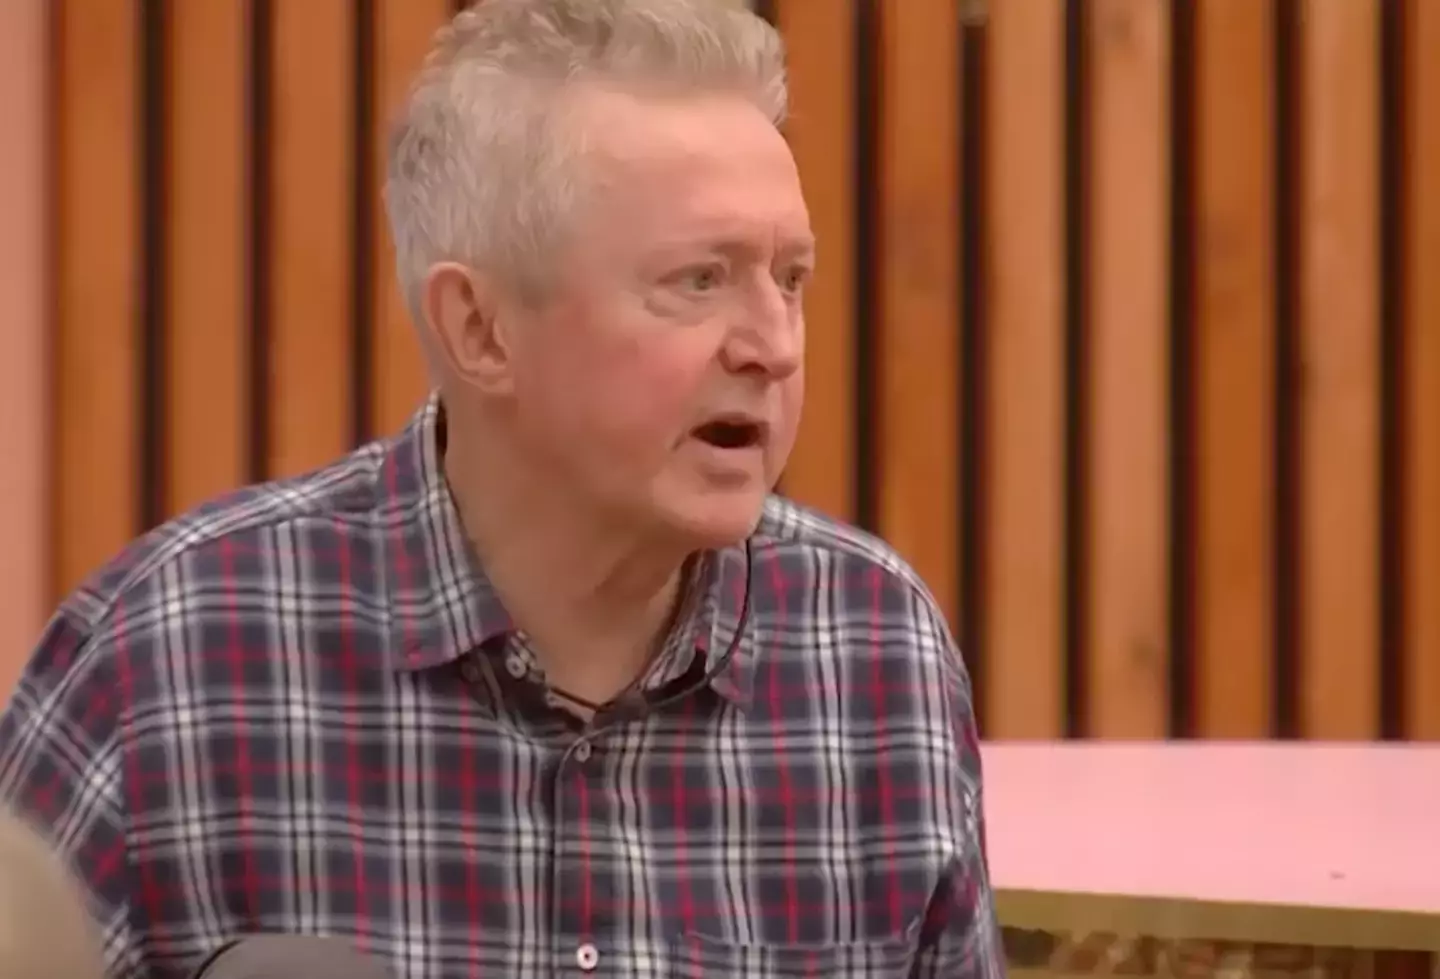 Walsh has opened up about how he struggled with his mental health during his time in the CBB house.